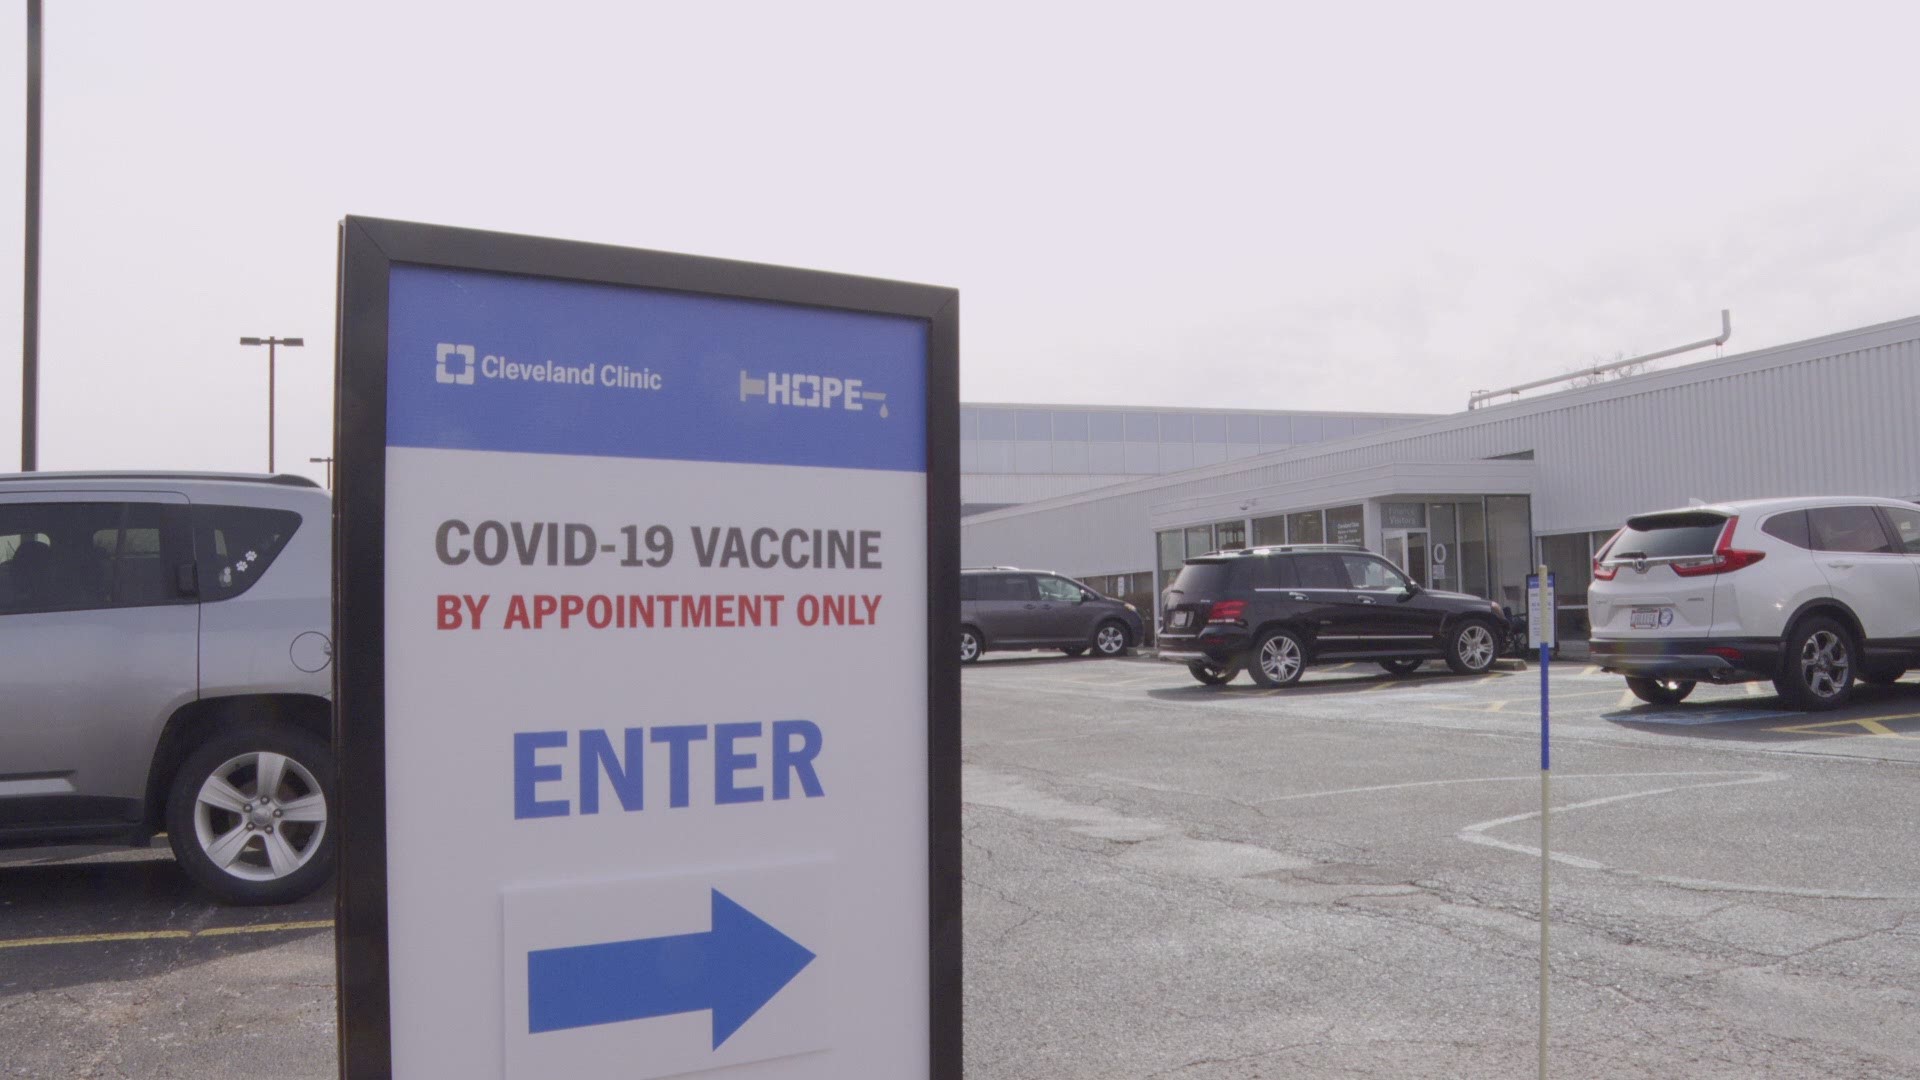 Doctors believe they will be able to vaccinate roughly 1,500 people a day at the location.